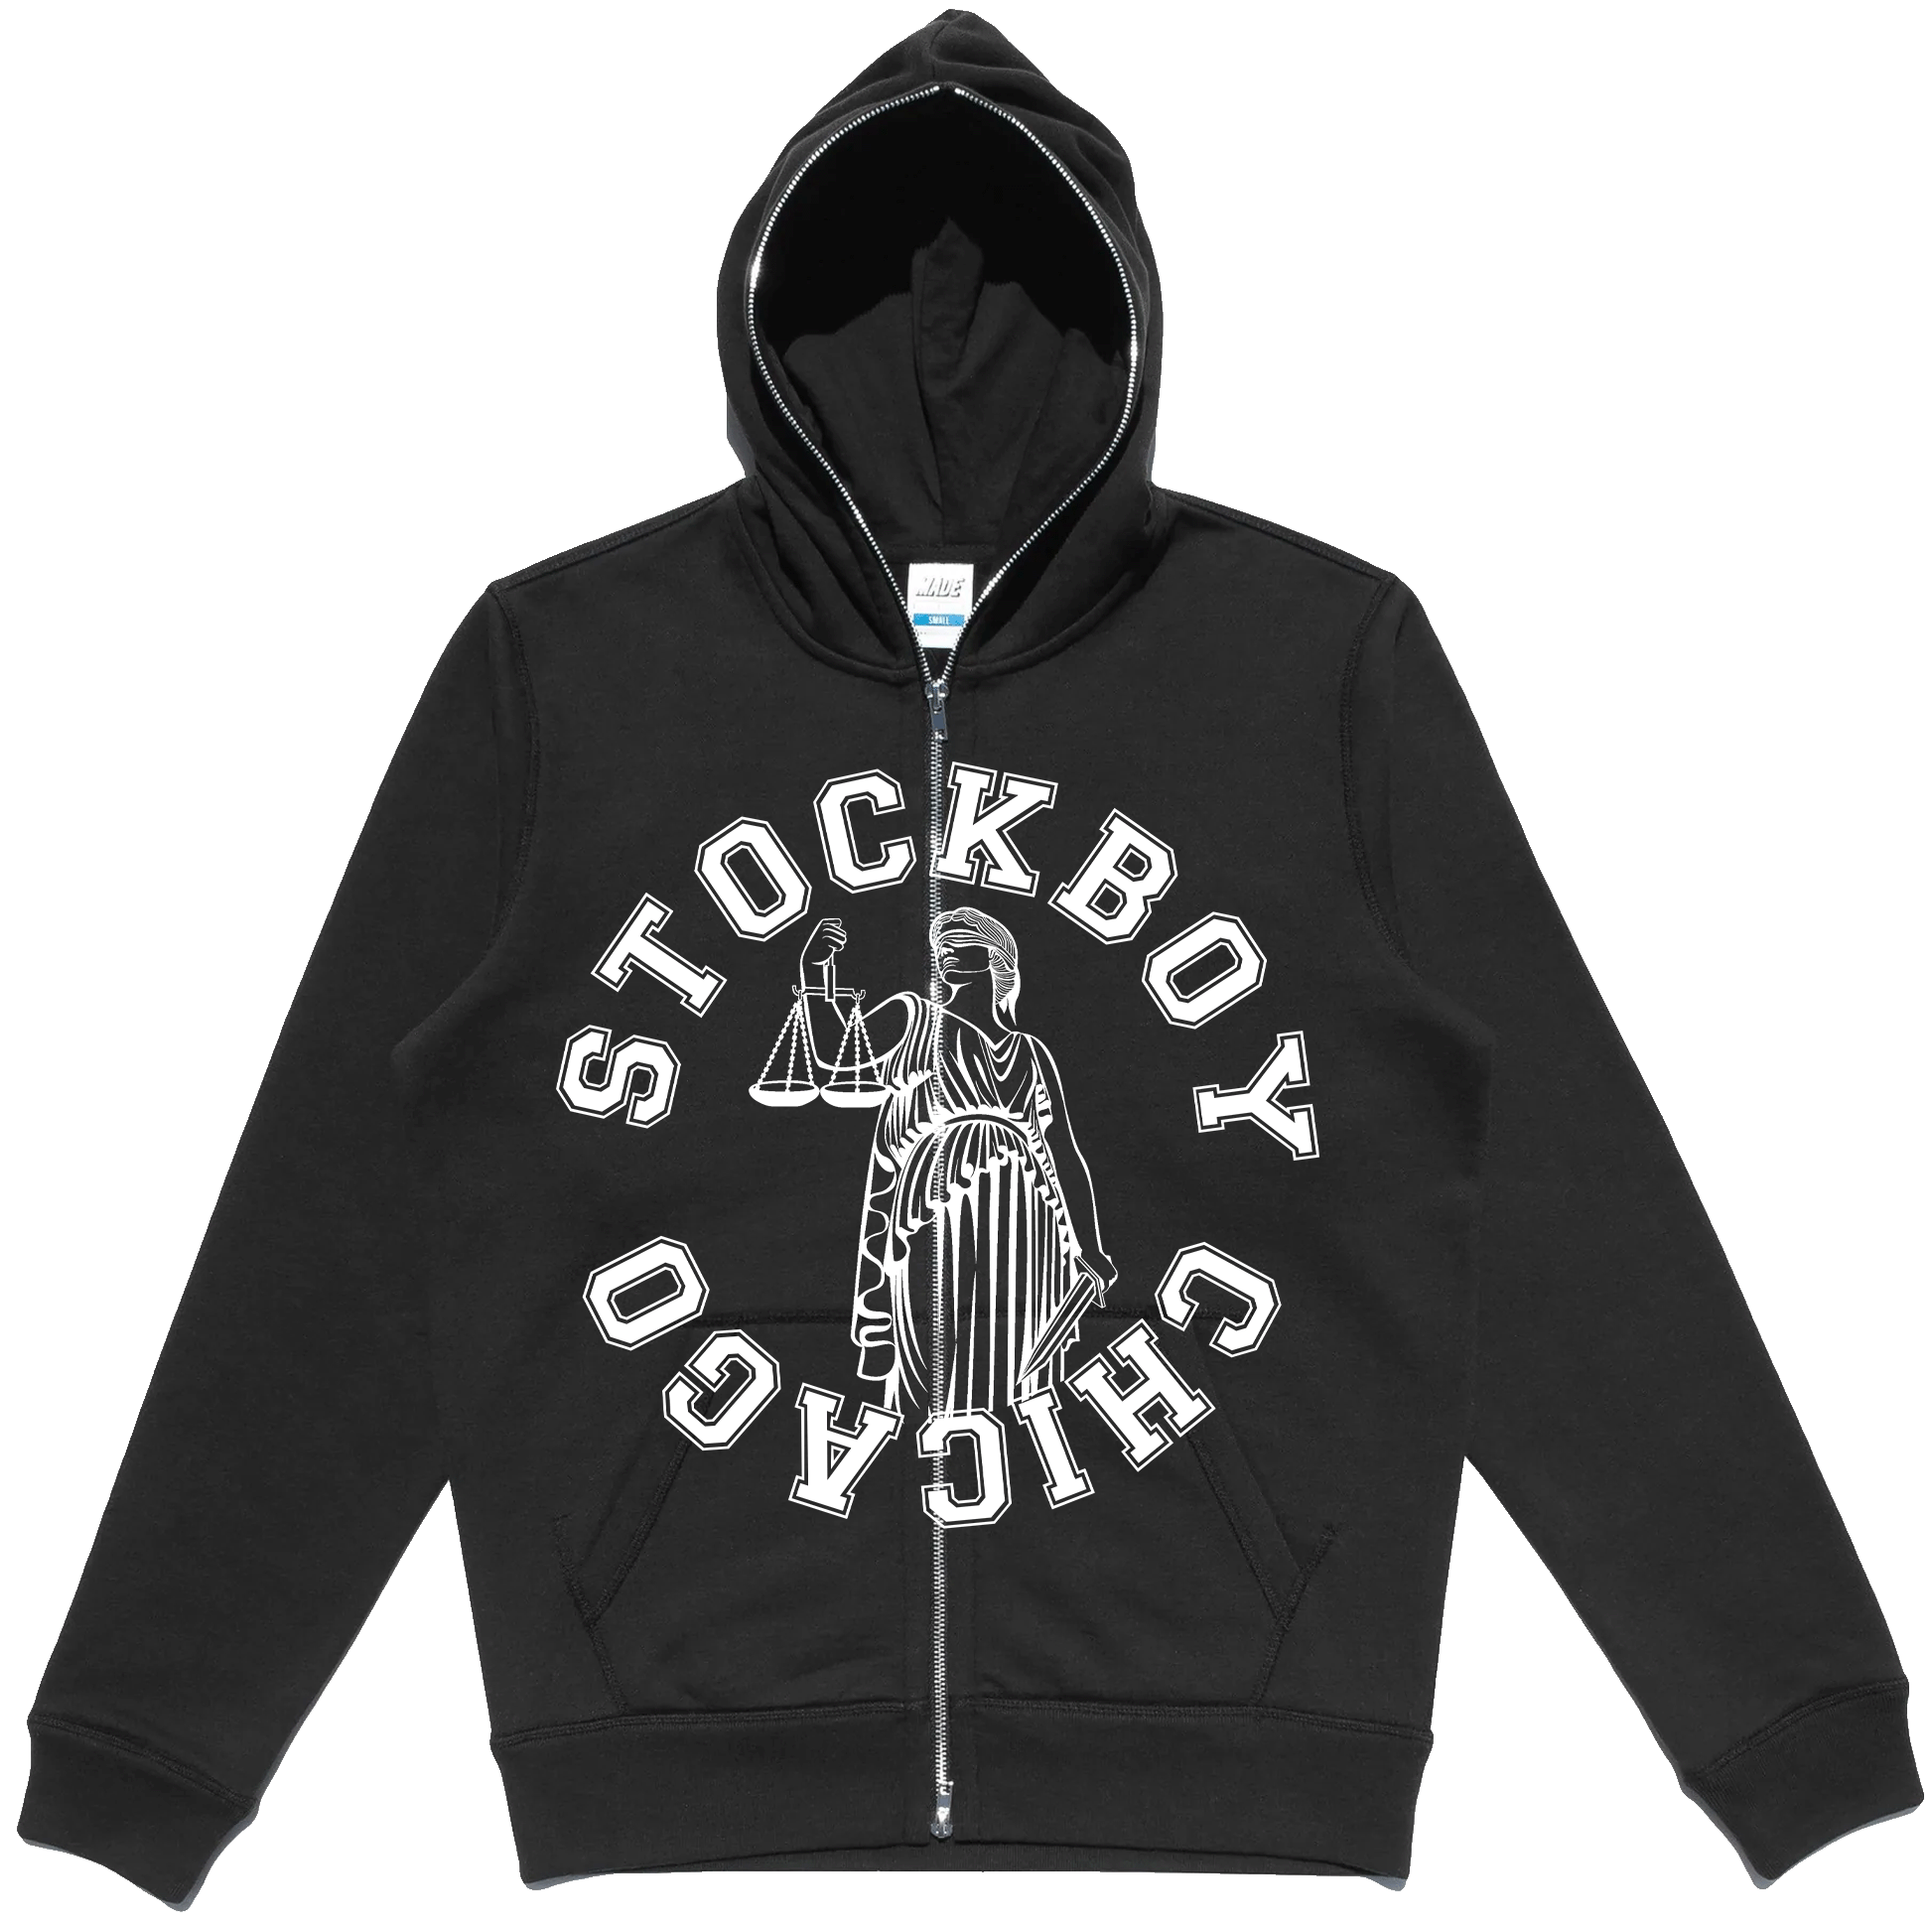 Stock Boy Lady Of Justice Full-Zip 60 USD